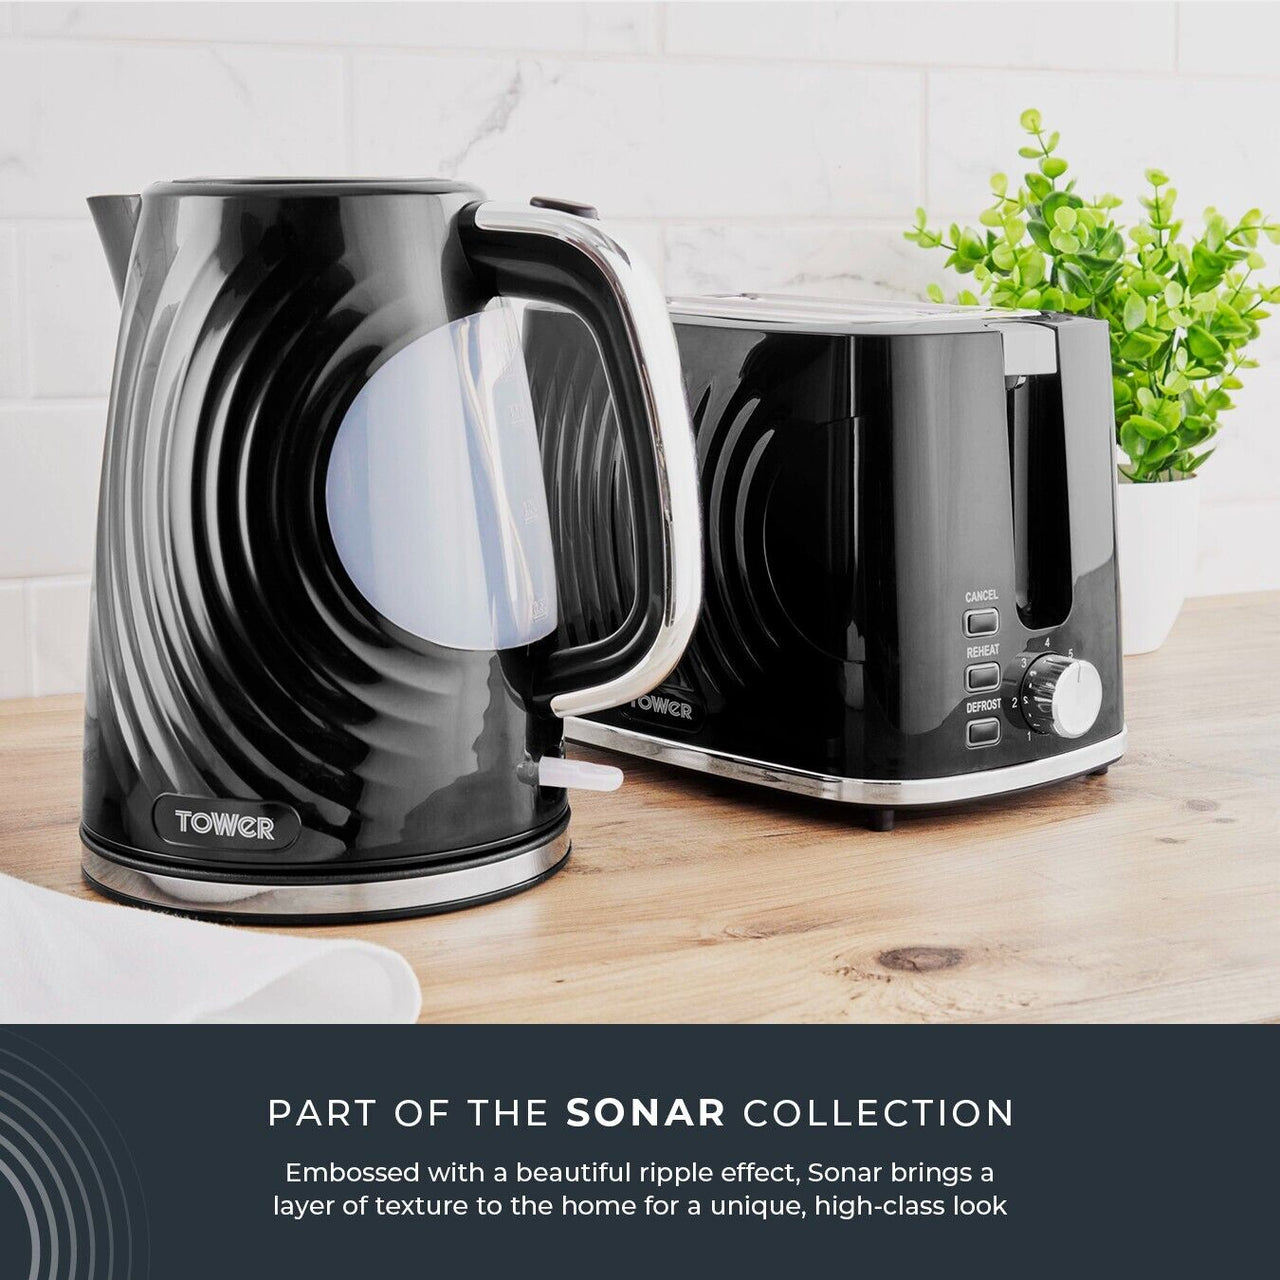 Tower Sonar 1.7L 3KW Kettle & 2 Slice Toaster. Black/Chrome Accents Stylish Ripple Design